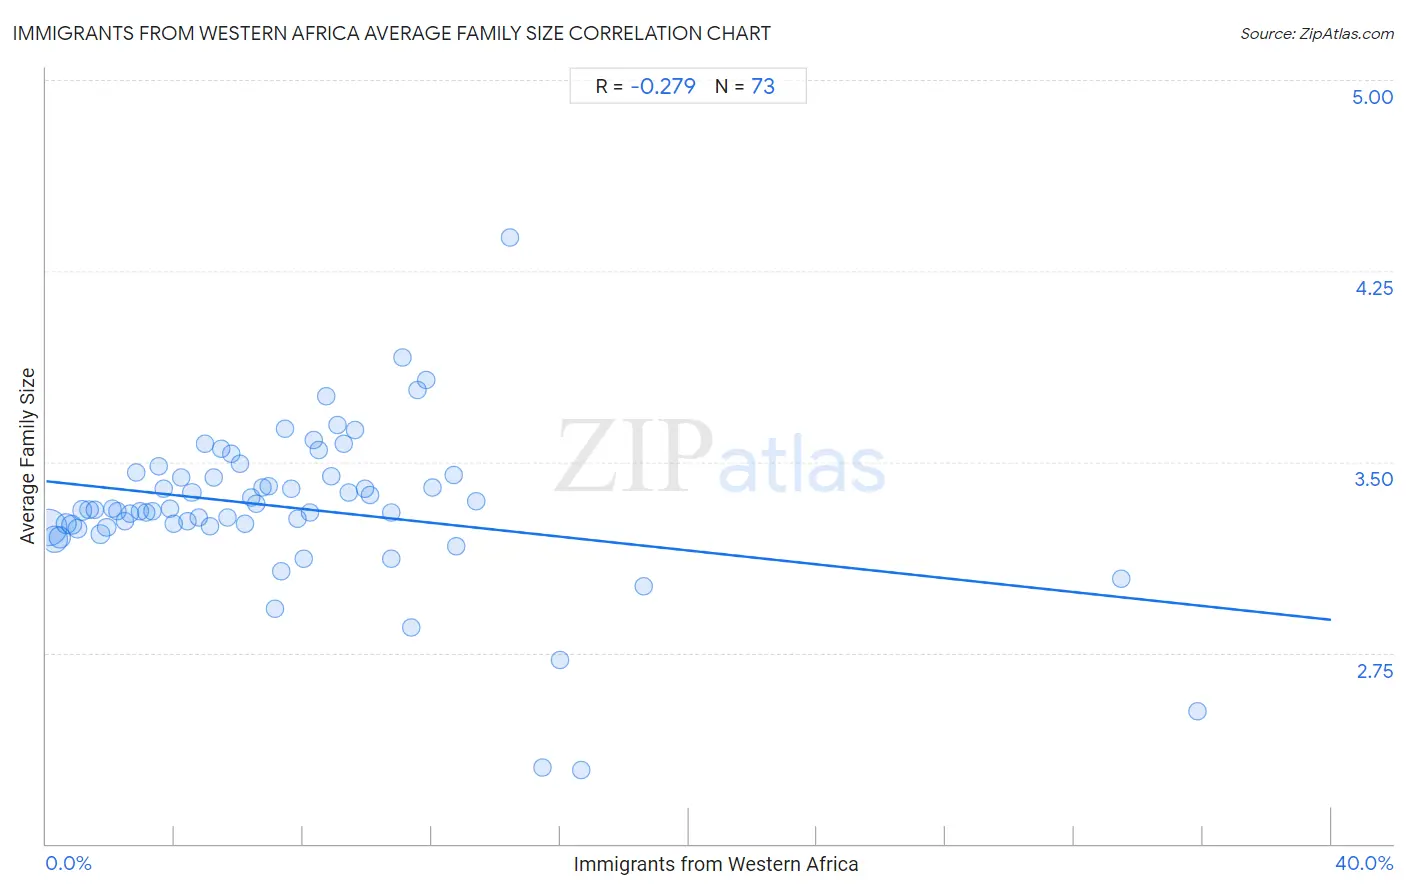 Immigrants from Western Africa Average Family Size